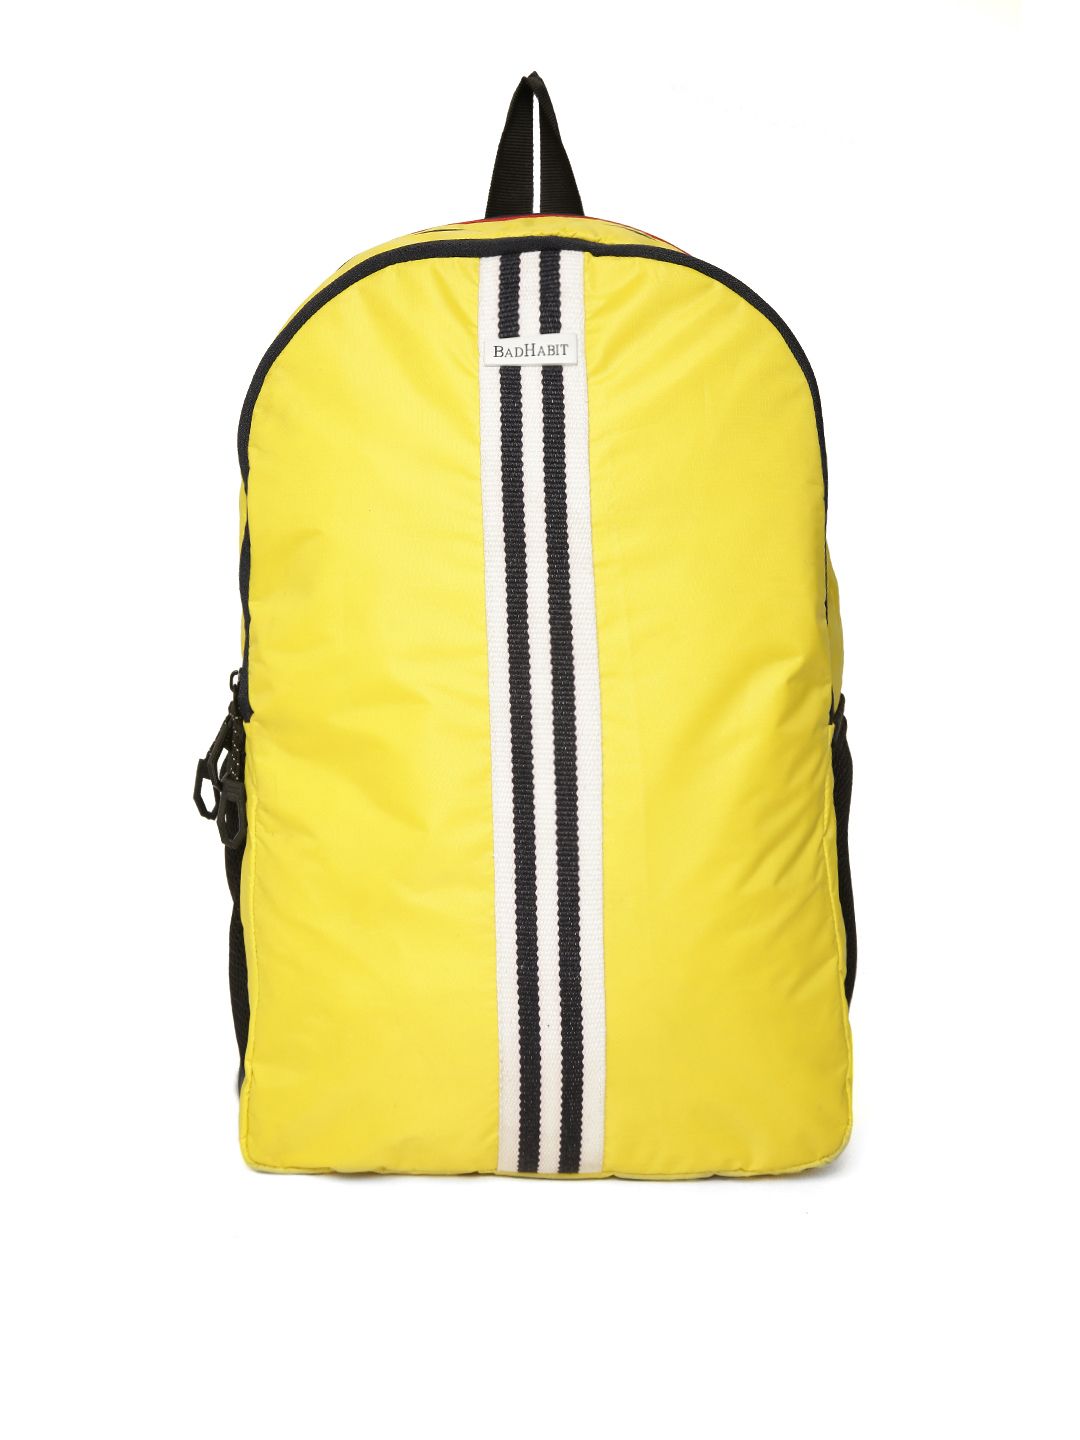 BAD HABIT Unisex Yellow Solid Backpack Price in India